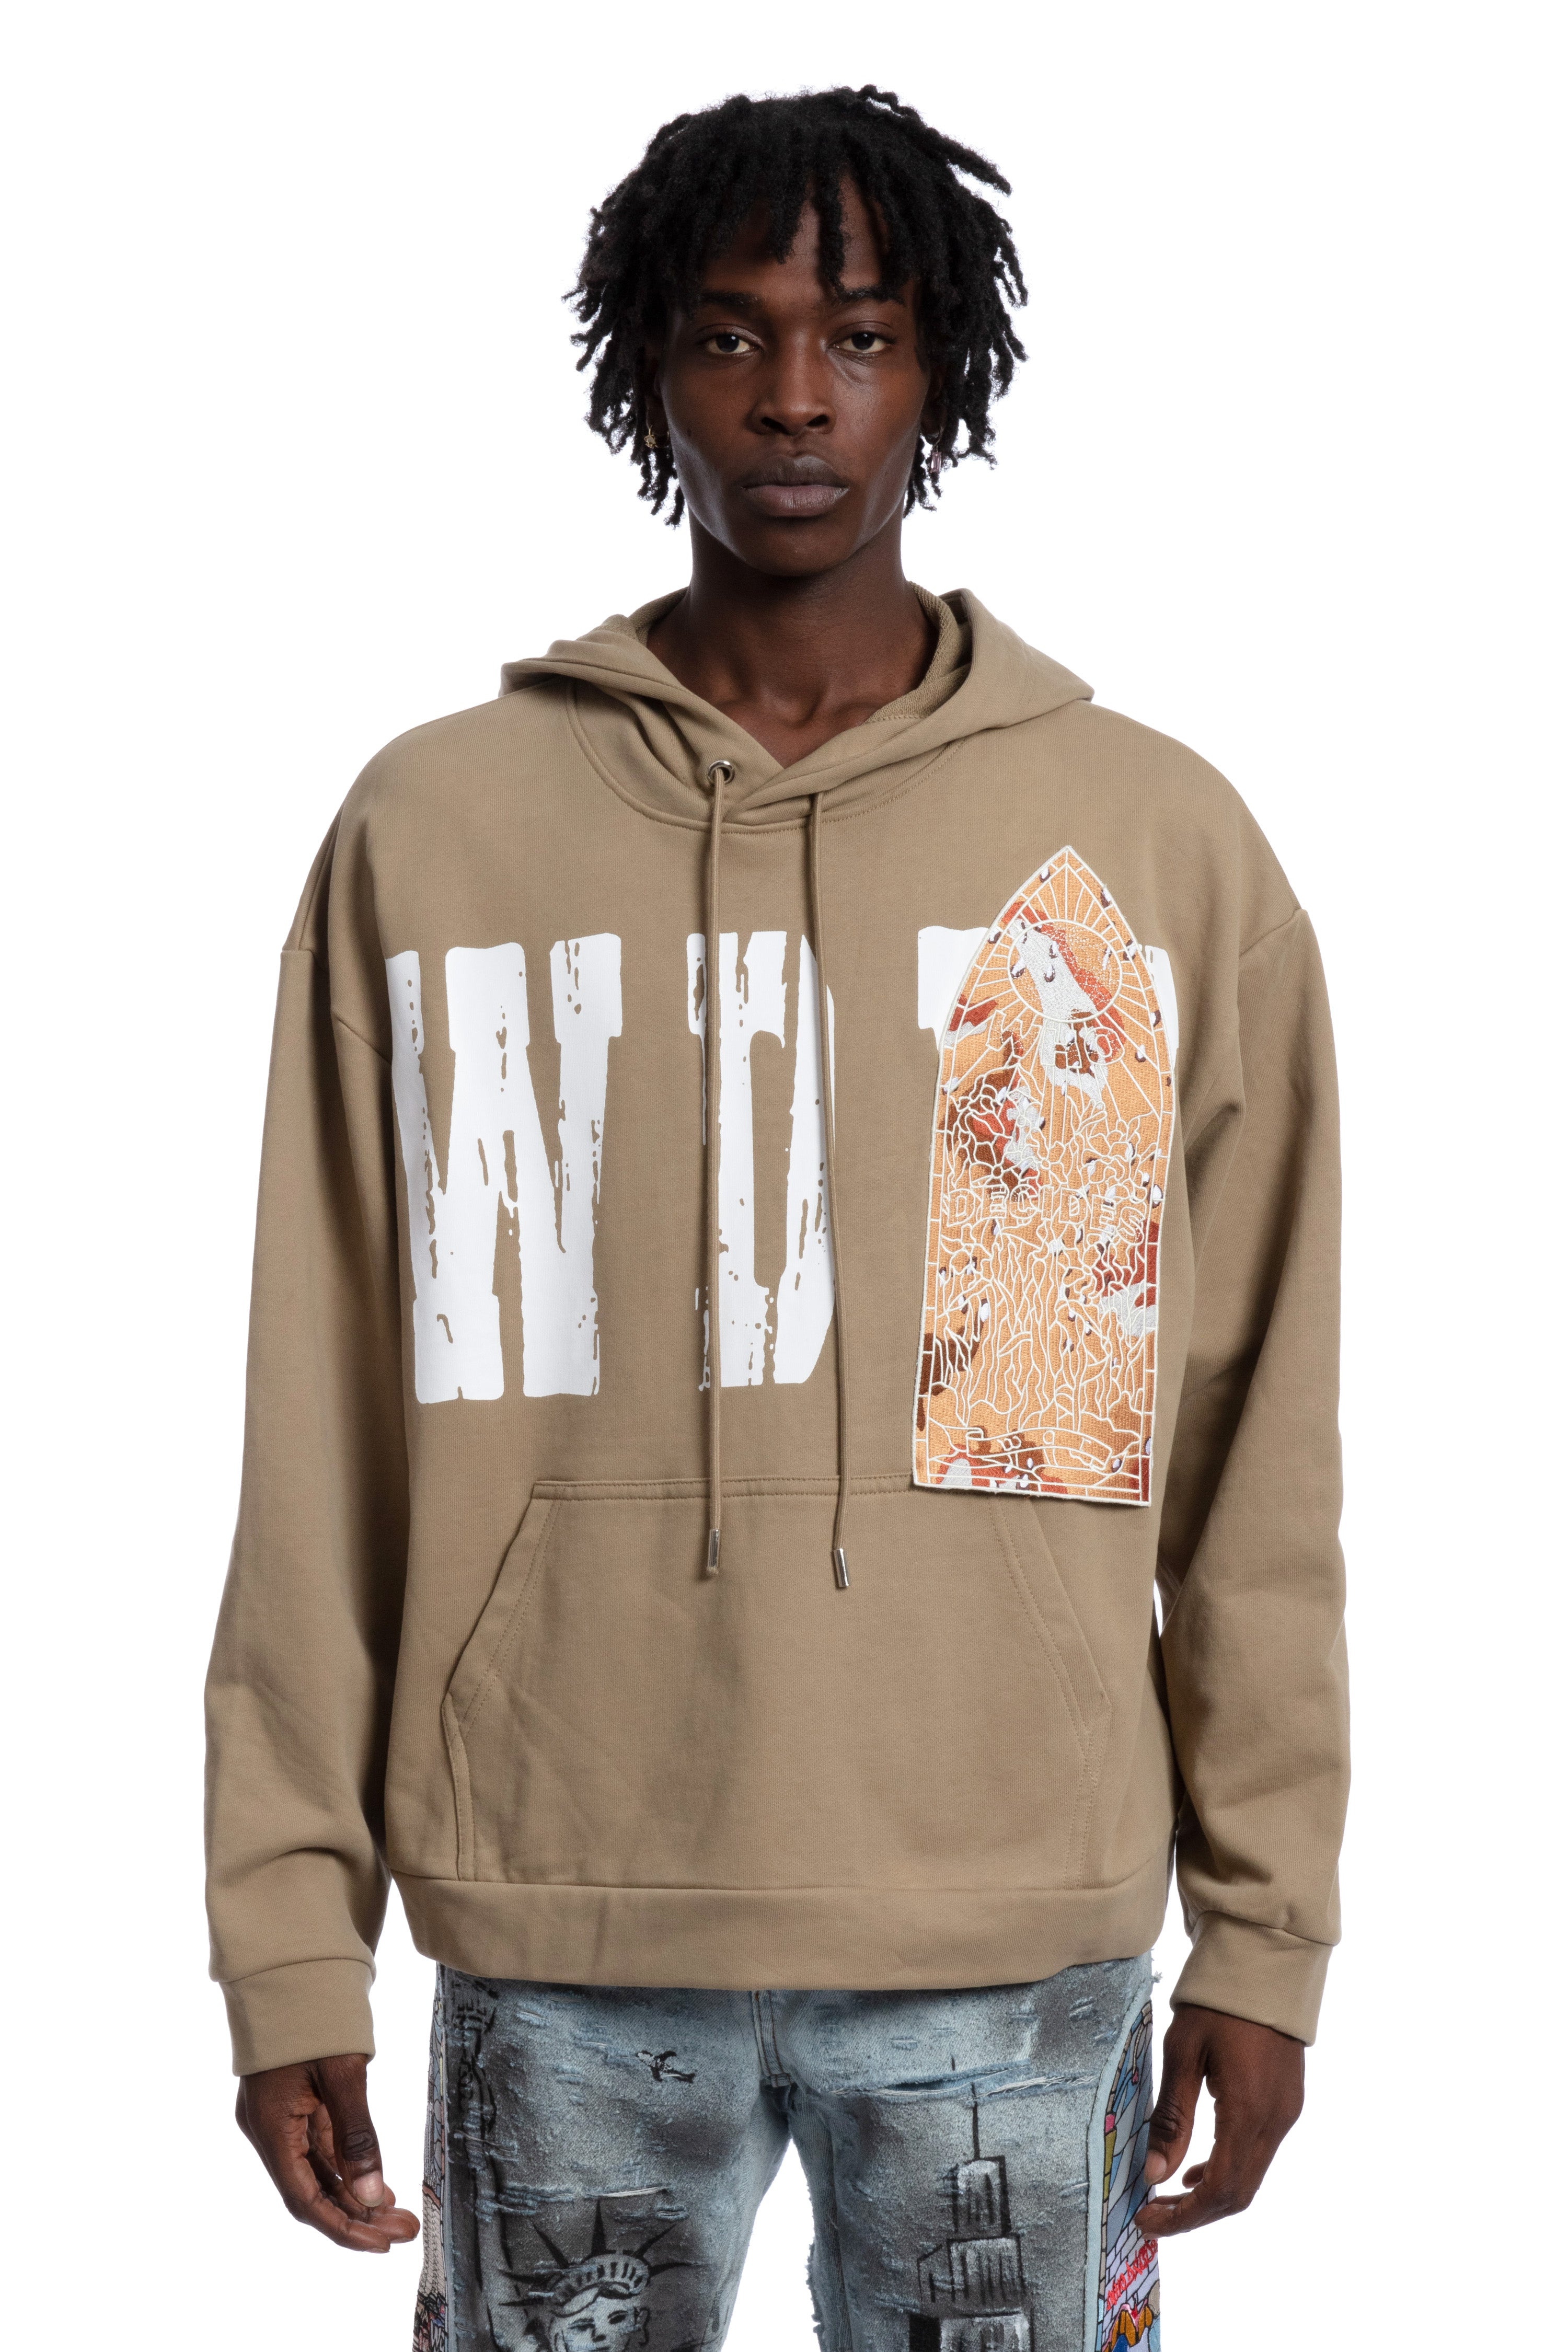 PATCHED HOODED SWEATSHIRT – WHO DECIDES WAR